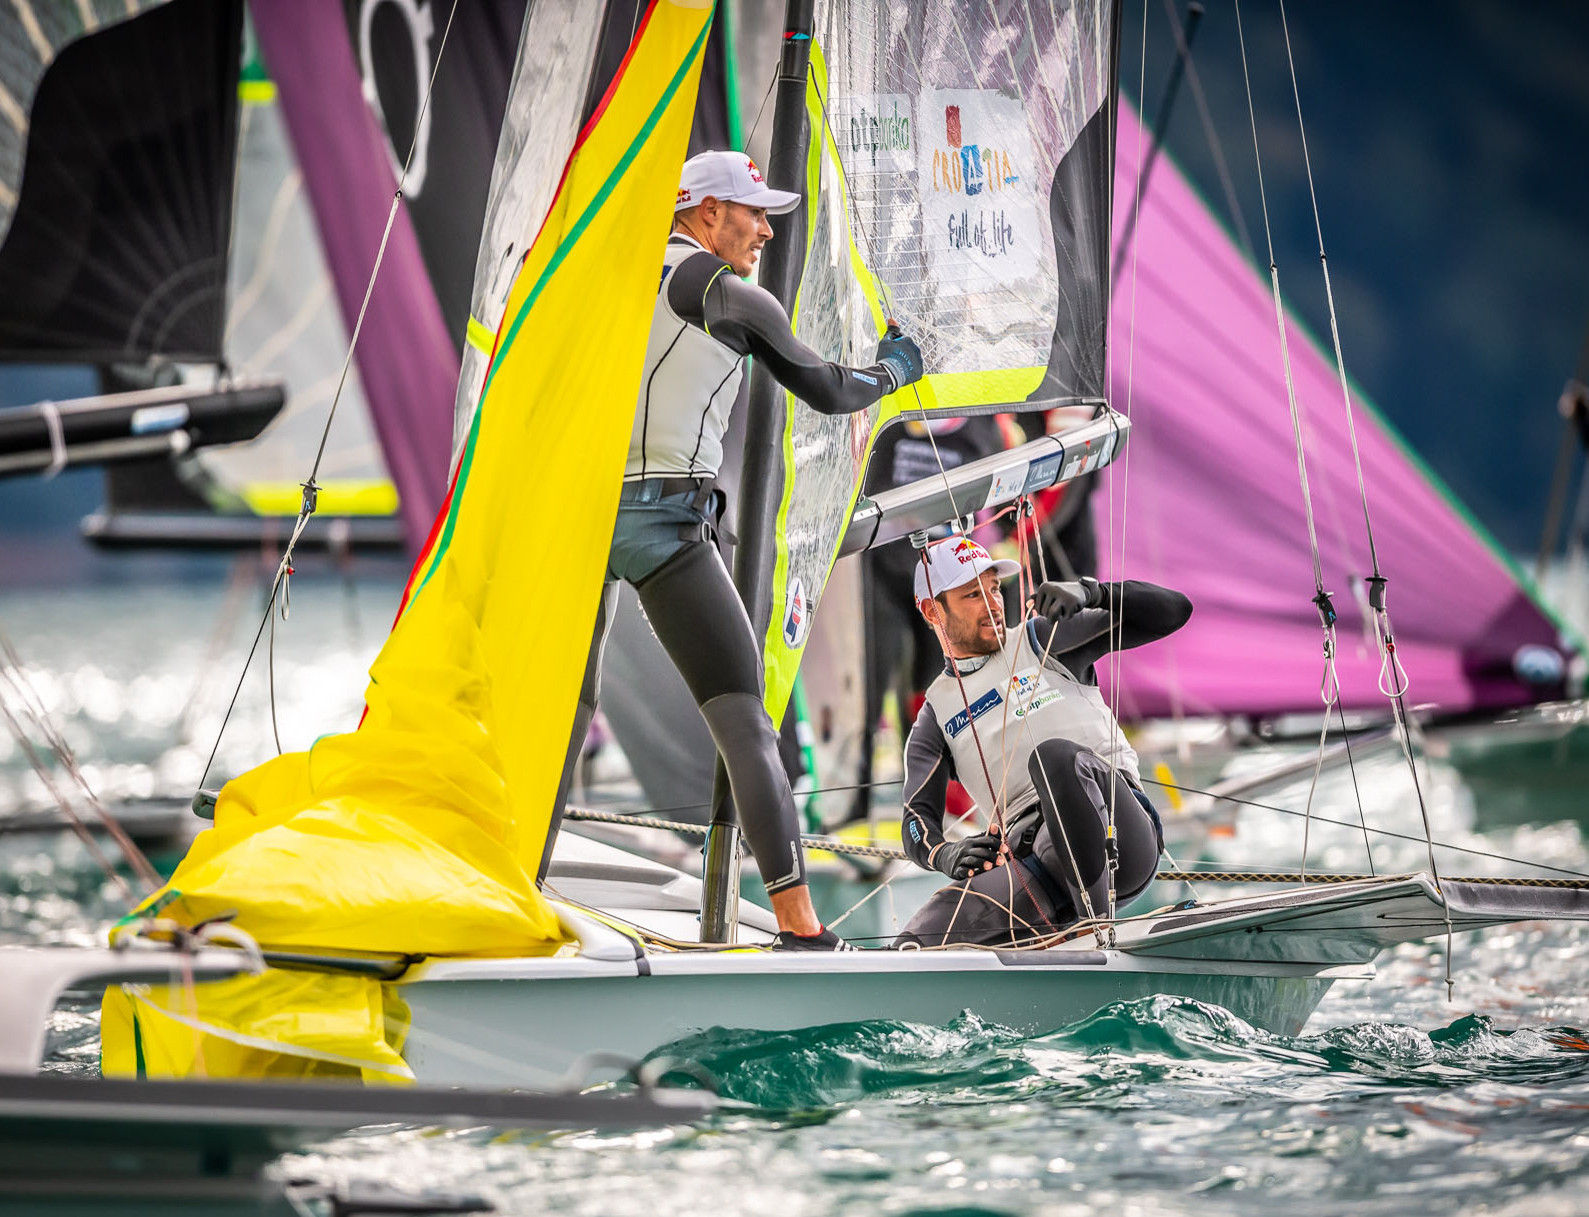 Croatian brothers Šime and Mihovil Fantela have maintained their lead in the European 49er Championship ©49er